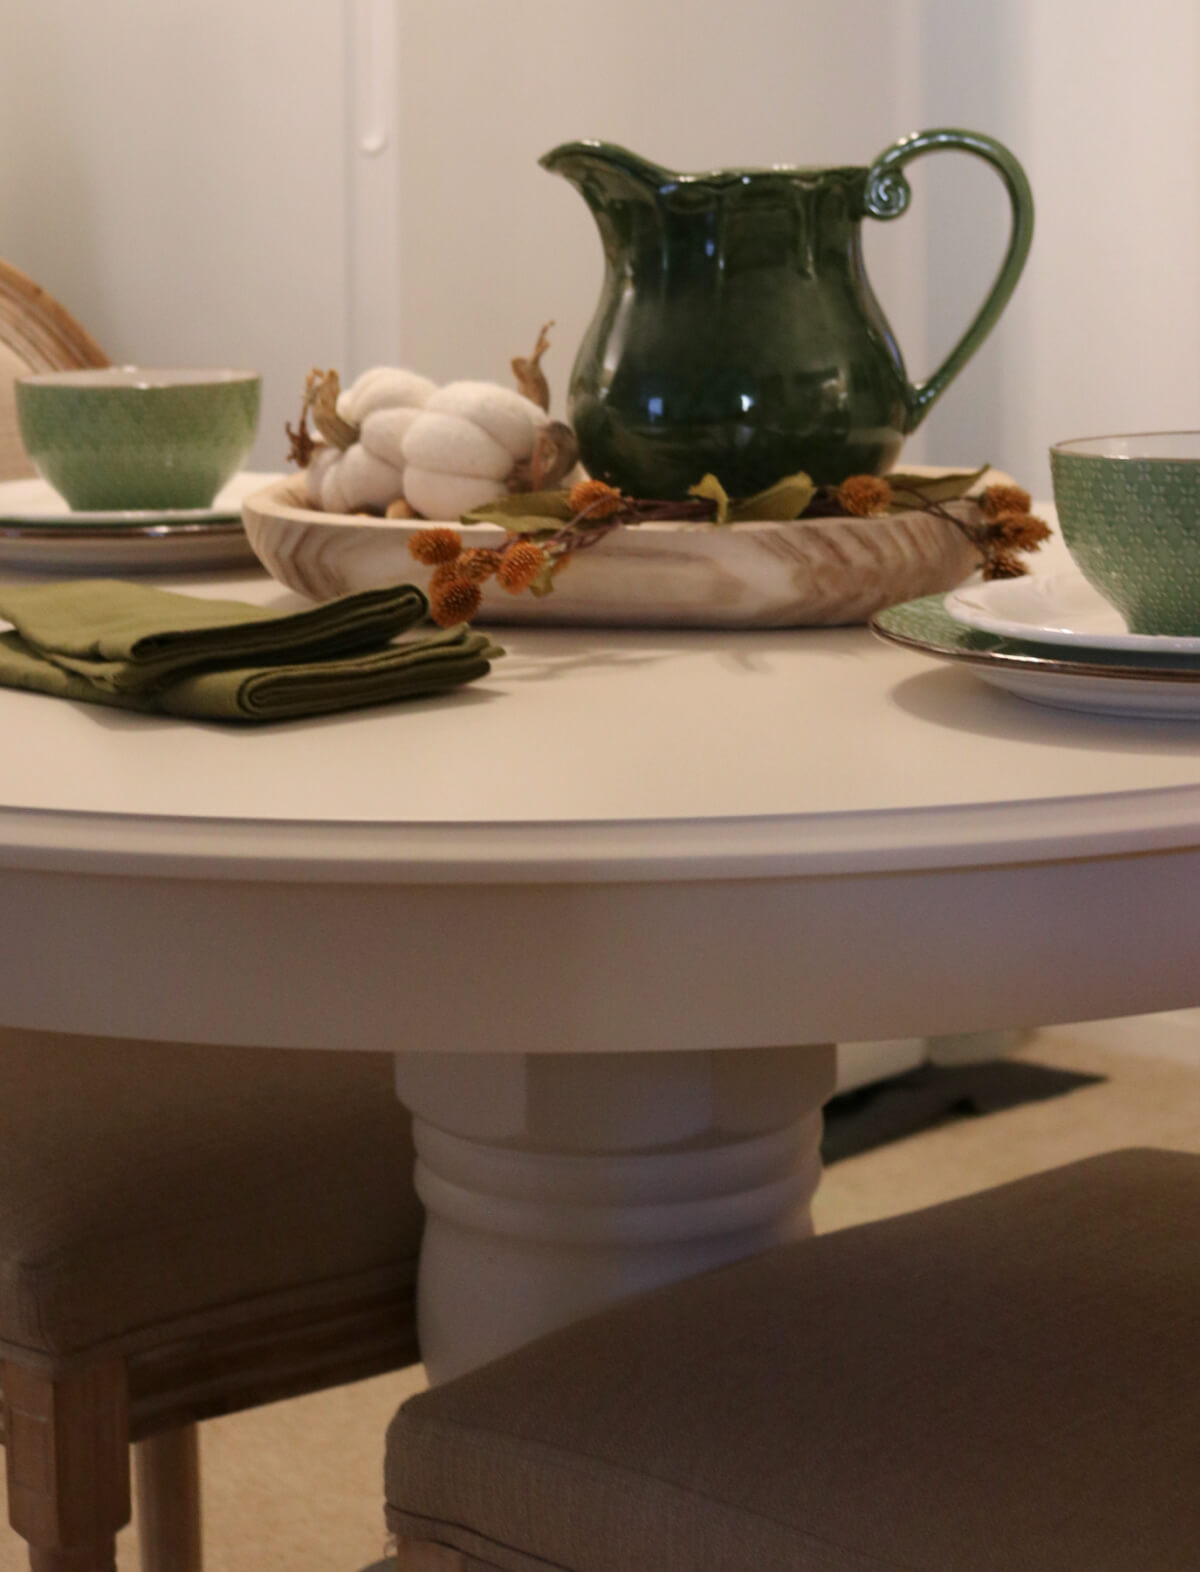 In Tablescape On A New Dining Table, everything on the table is green and cream.